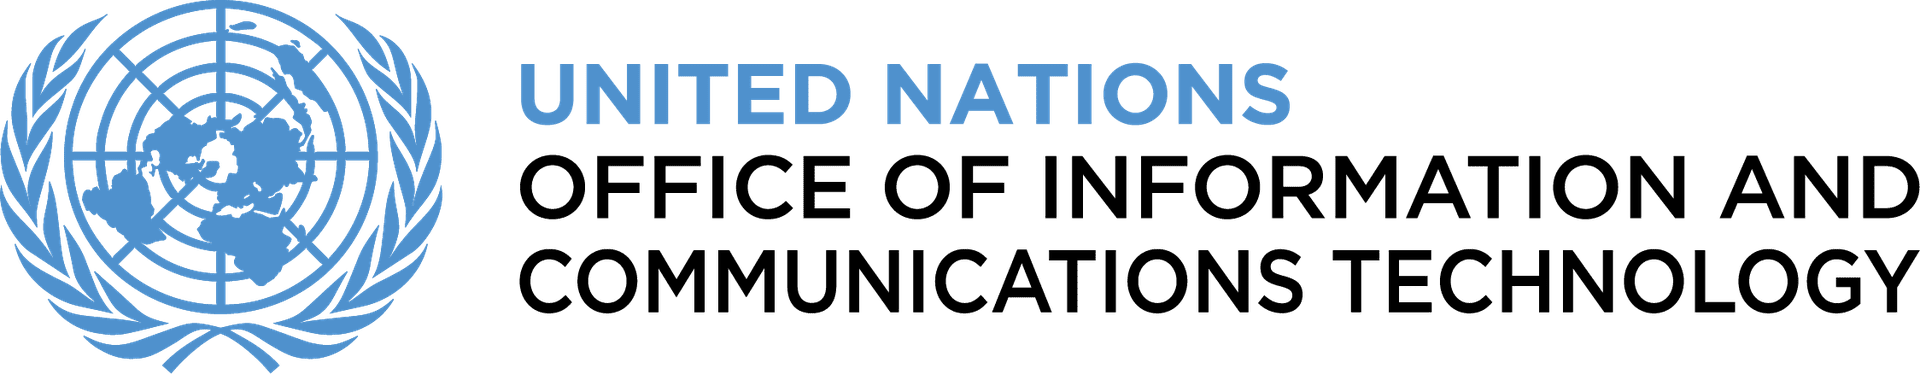 United Nations; Office of Information and Communications Technology logo